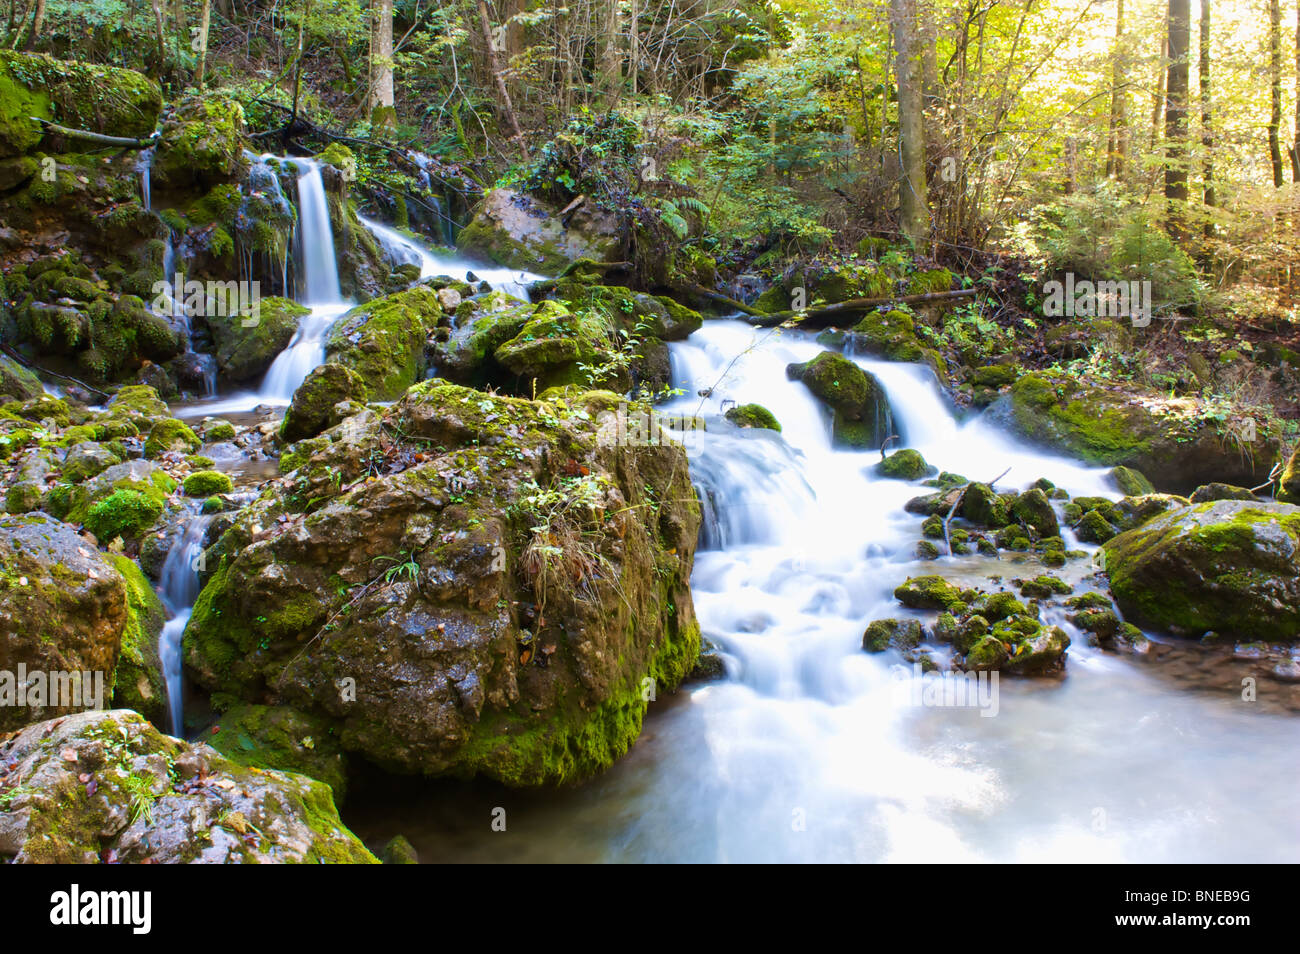 Waterfall In Forrest With Moss On Rocks Stock Photo Alamy